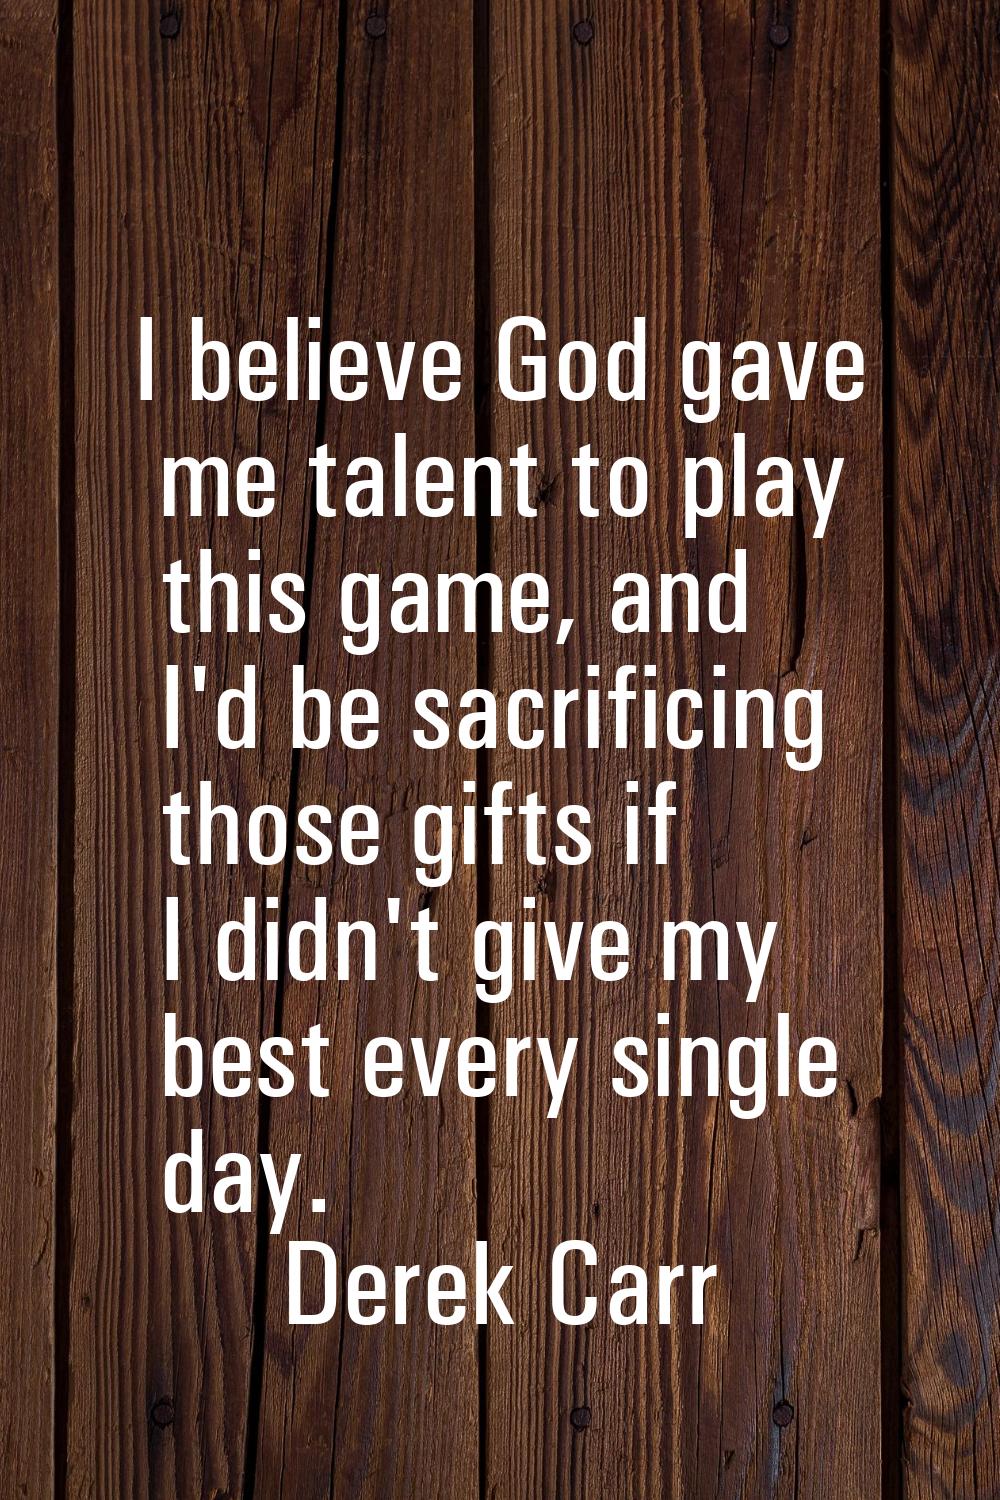 I believe God gave me talent to play this game, and I'd be sacrificing those gifts if I didn't give